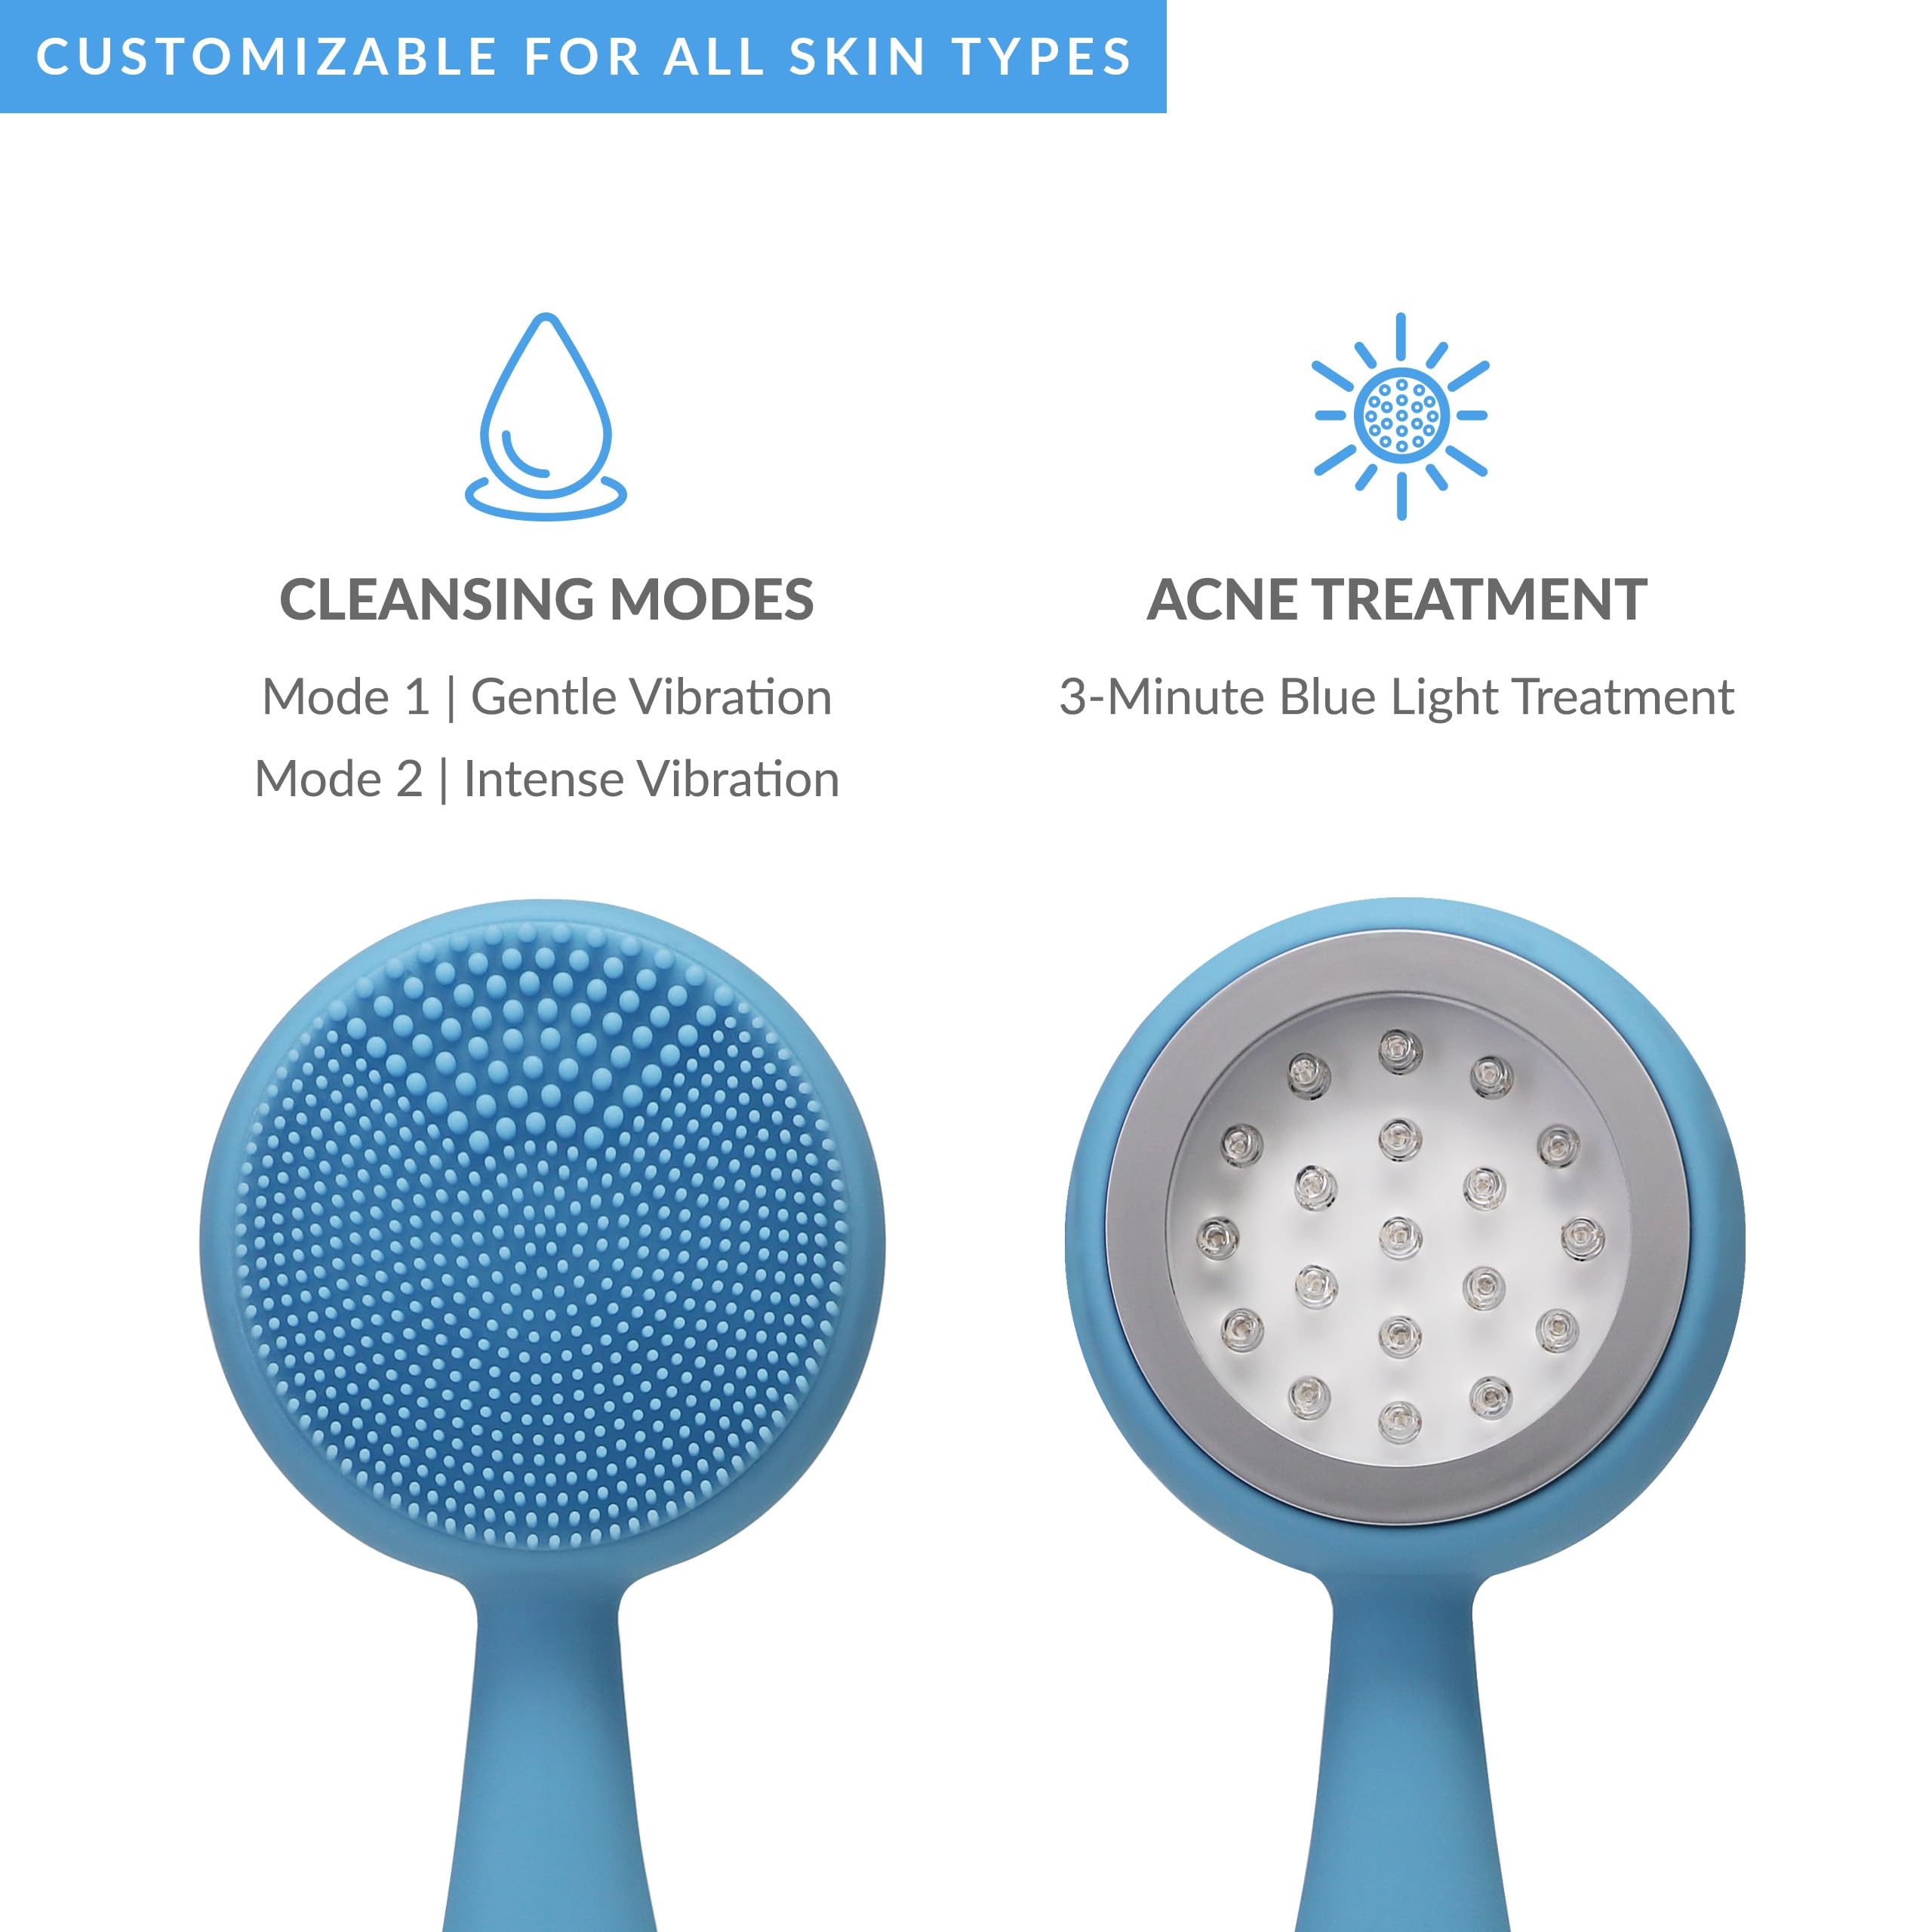 PMD Clean Acne - Smart Facial Cleansing Device with Silicone Brush & Acne-Fighting Blue Light Treatment - Waterproof - SonicGlow Vibration Technology - Eliminate Mild To Moderate Acne